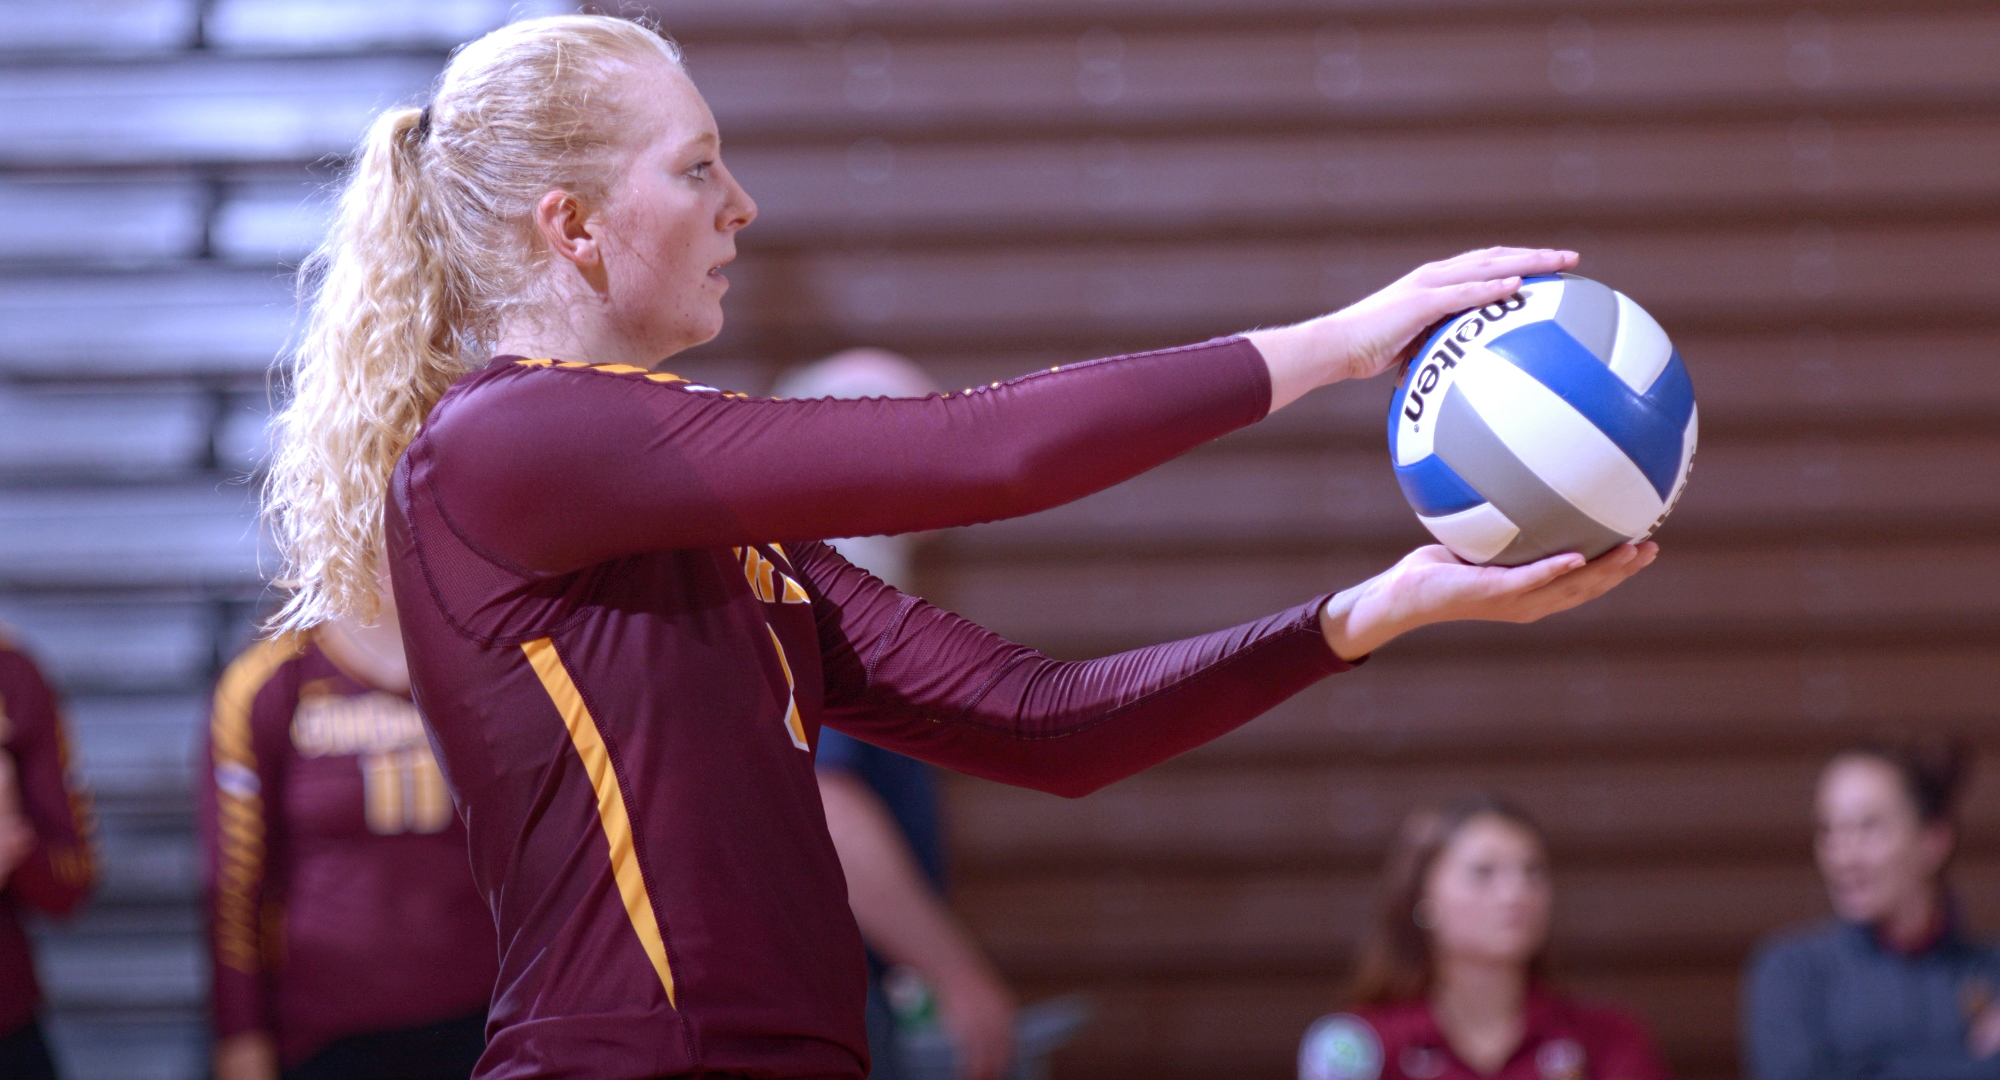 Freshman Brianna Carney had a career-high 18 kills in the Cobbers' 3-1 win over Macalester in the MIAC opener.,